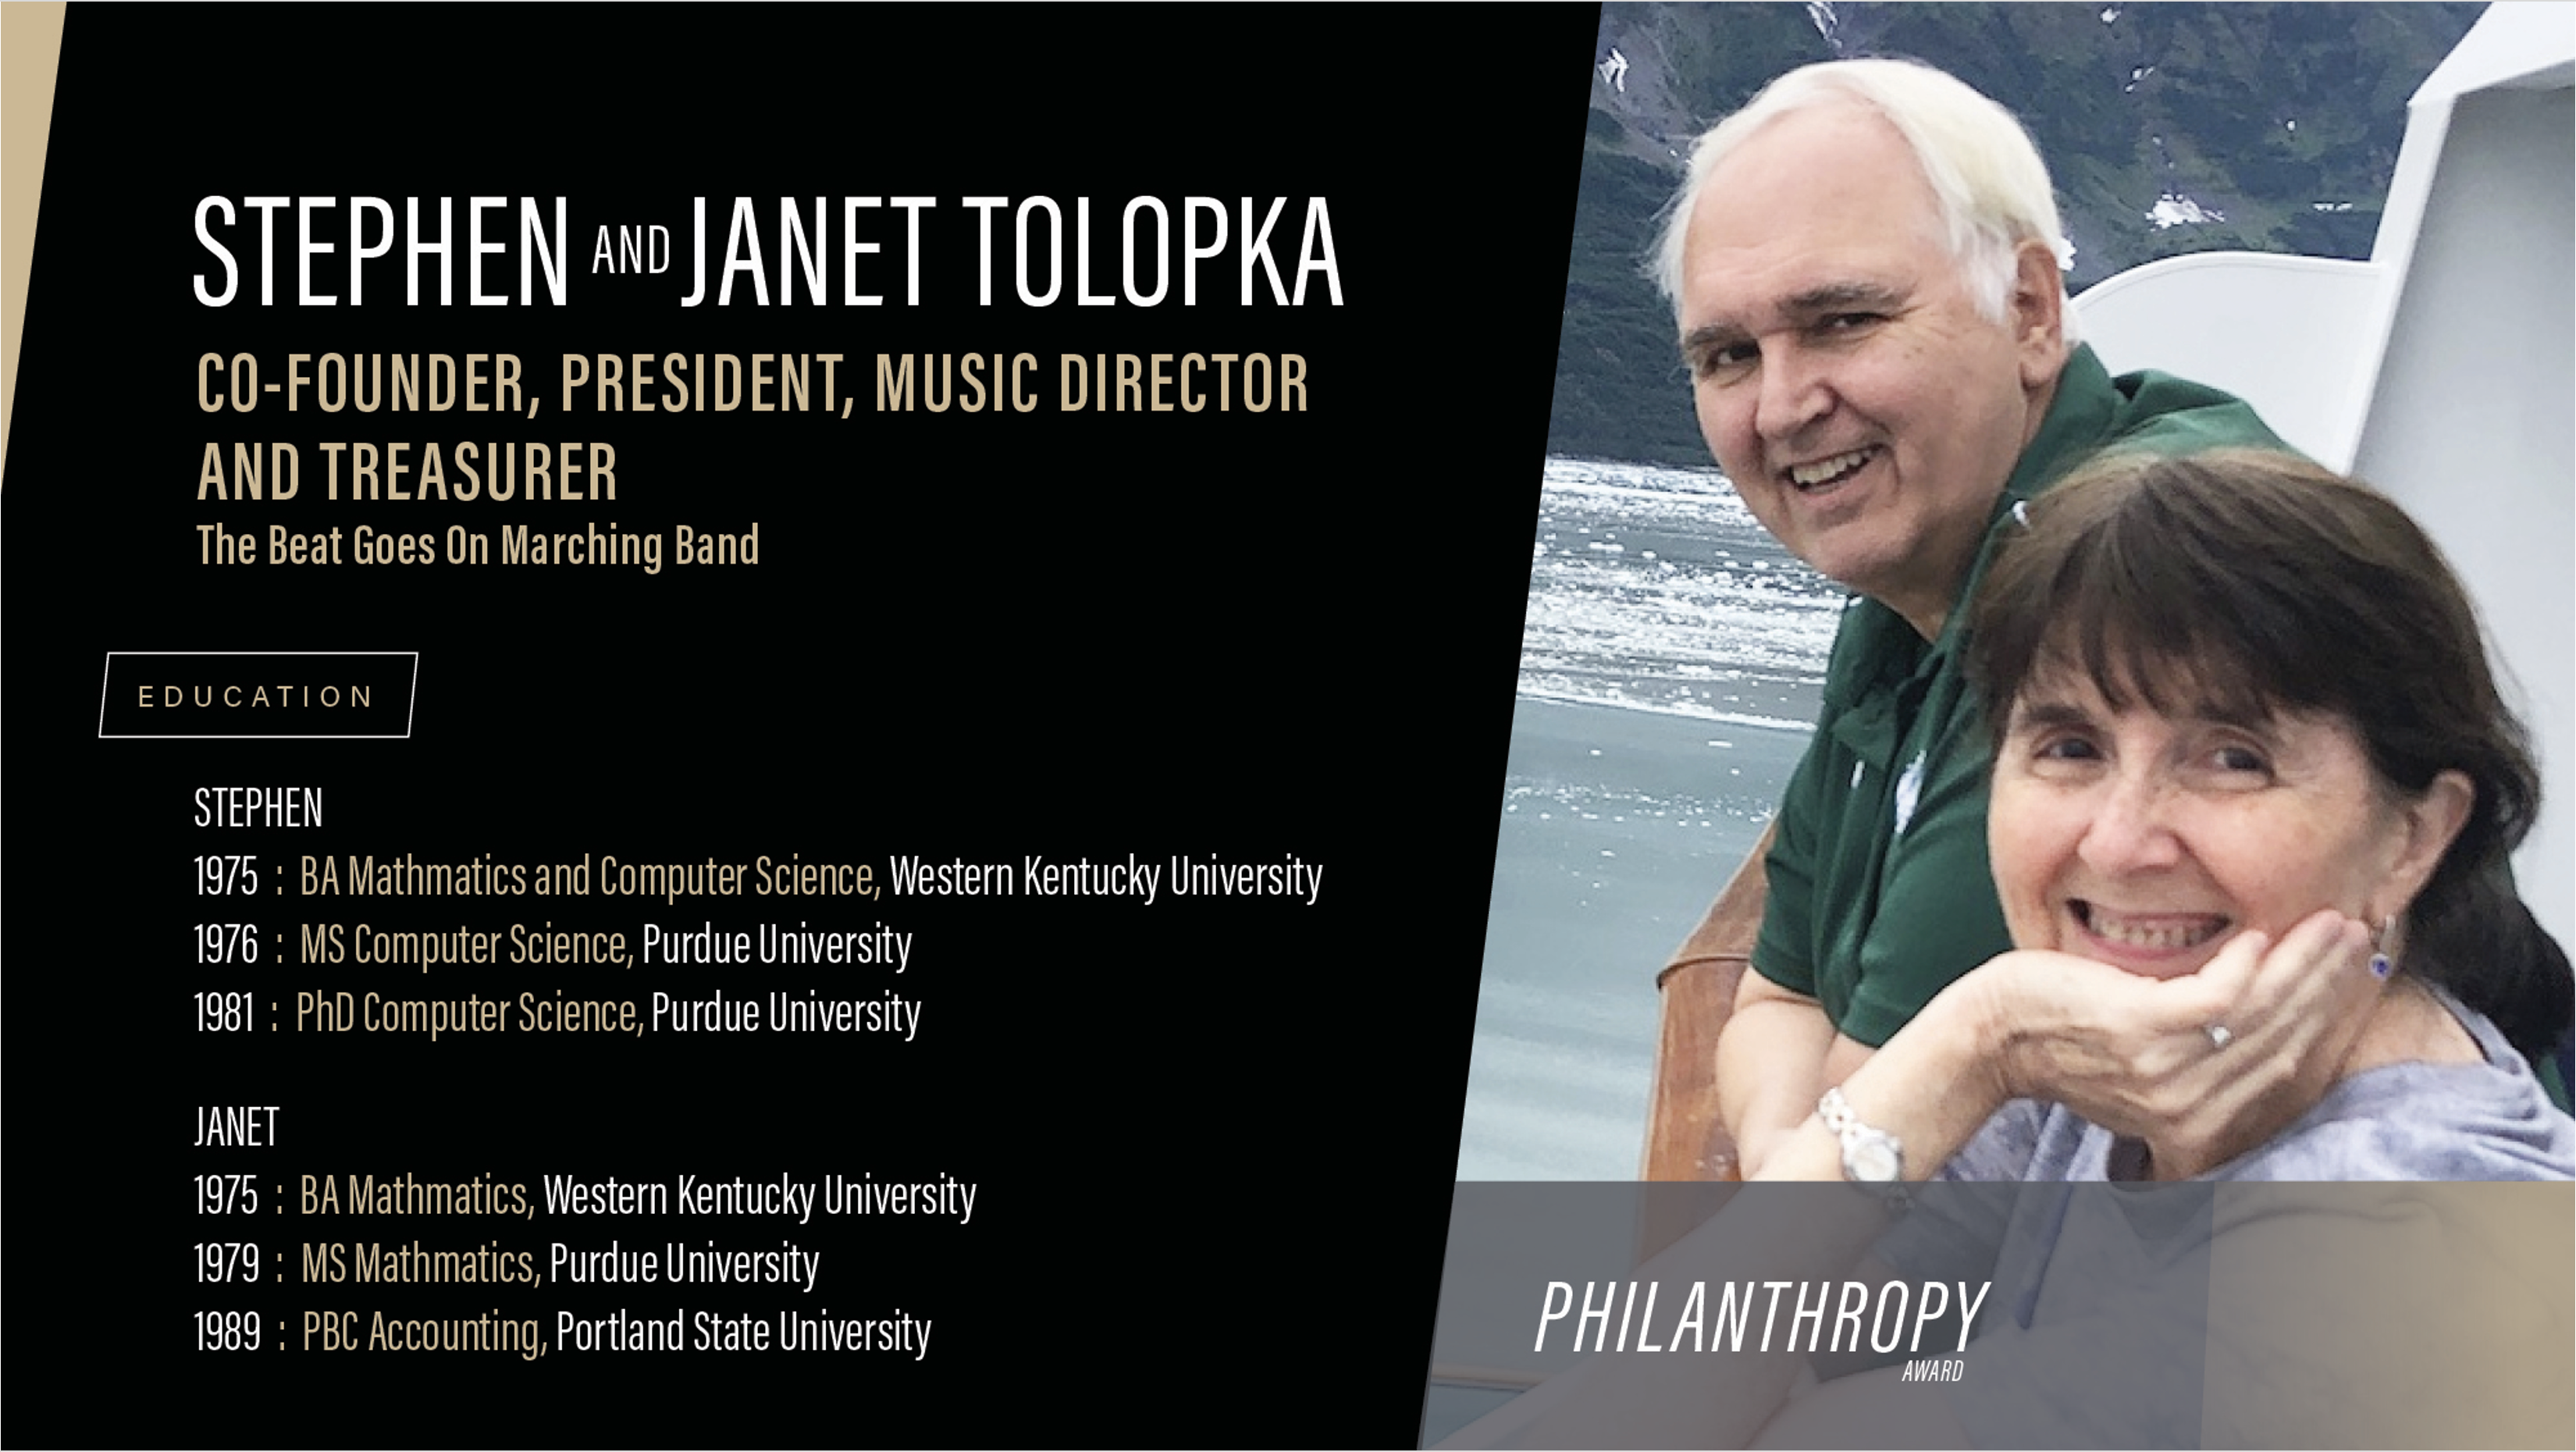 Stephen and Janet Tolopka